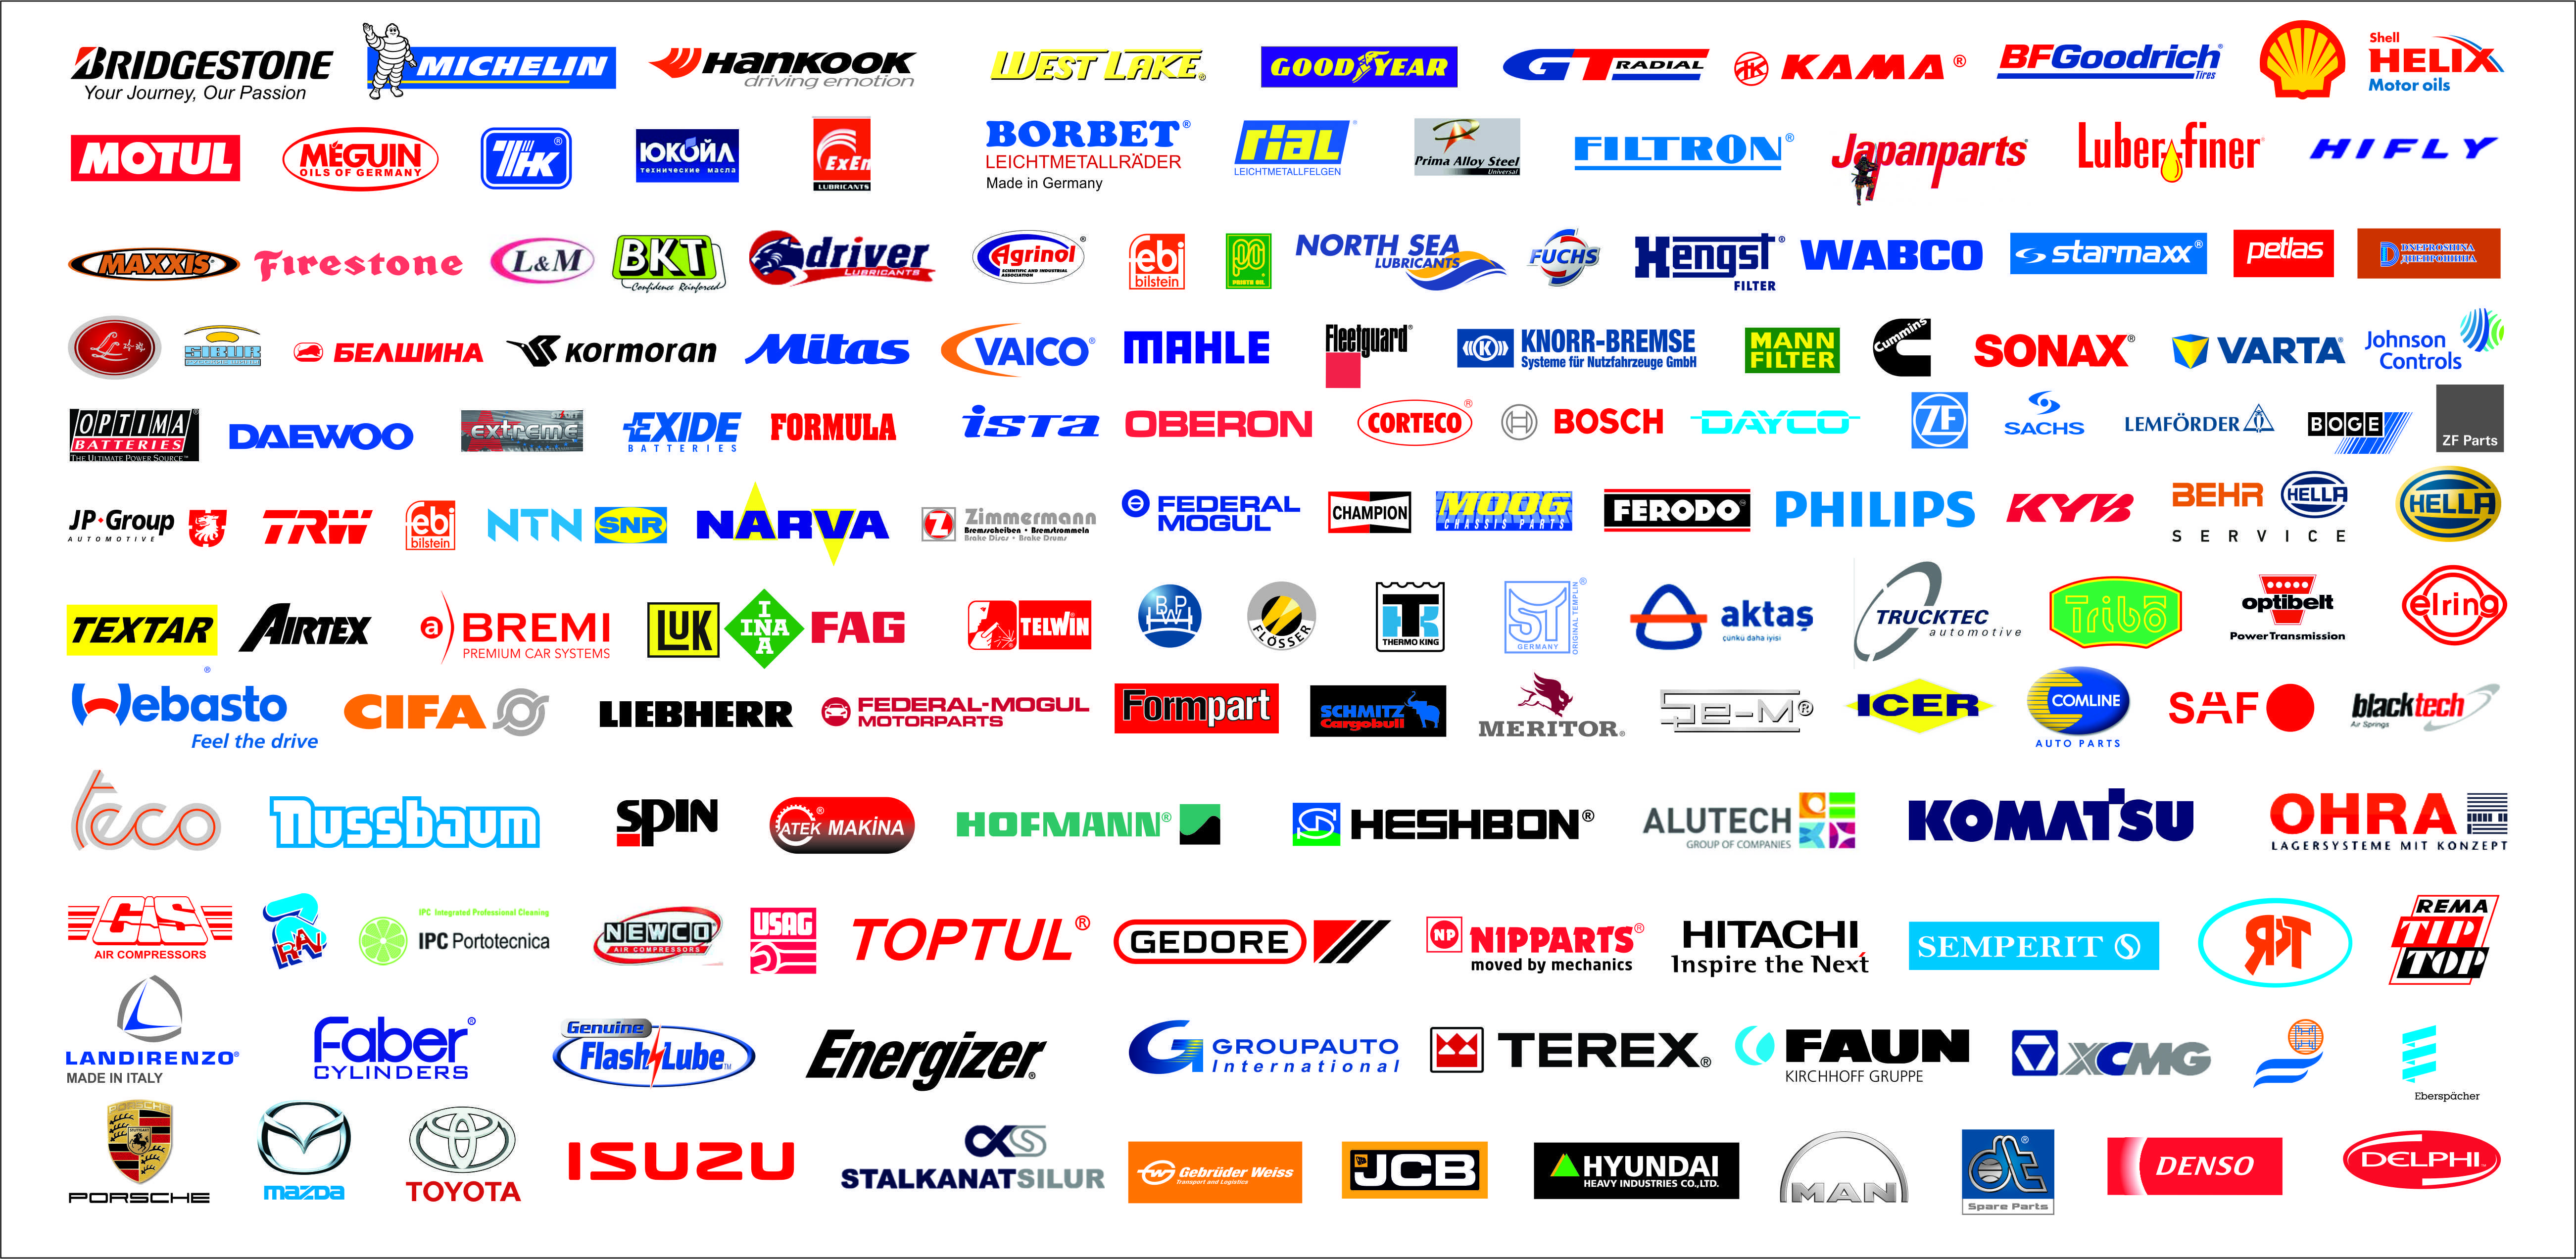 Brands of the Main Mechanical Equipment # 5205x2544. All